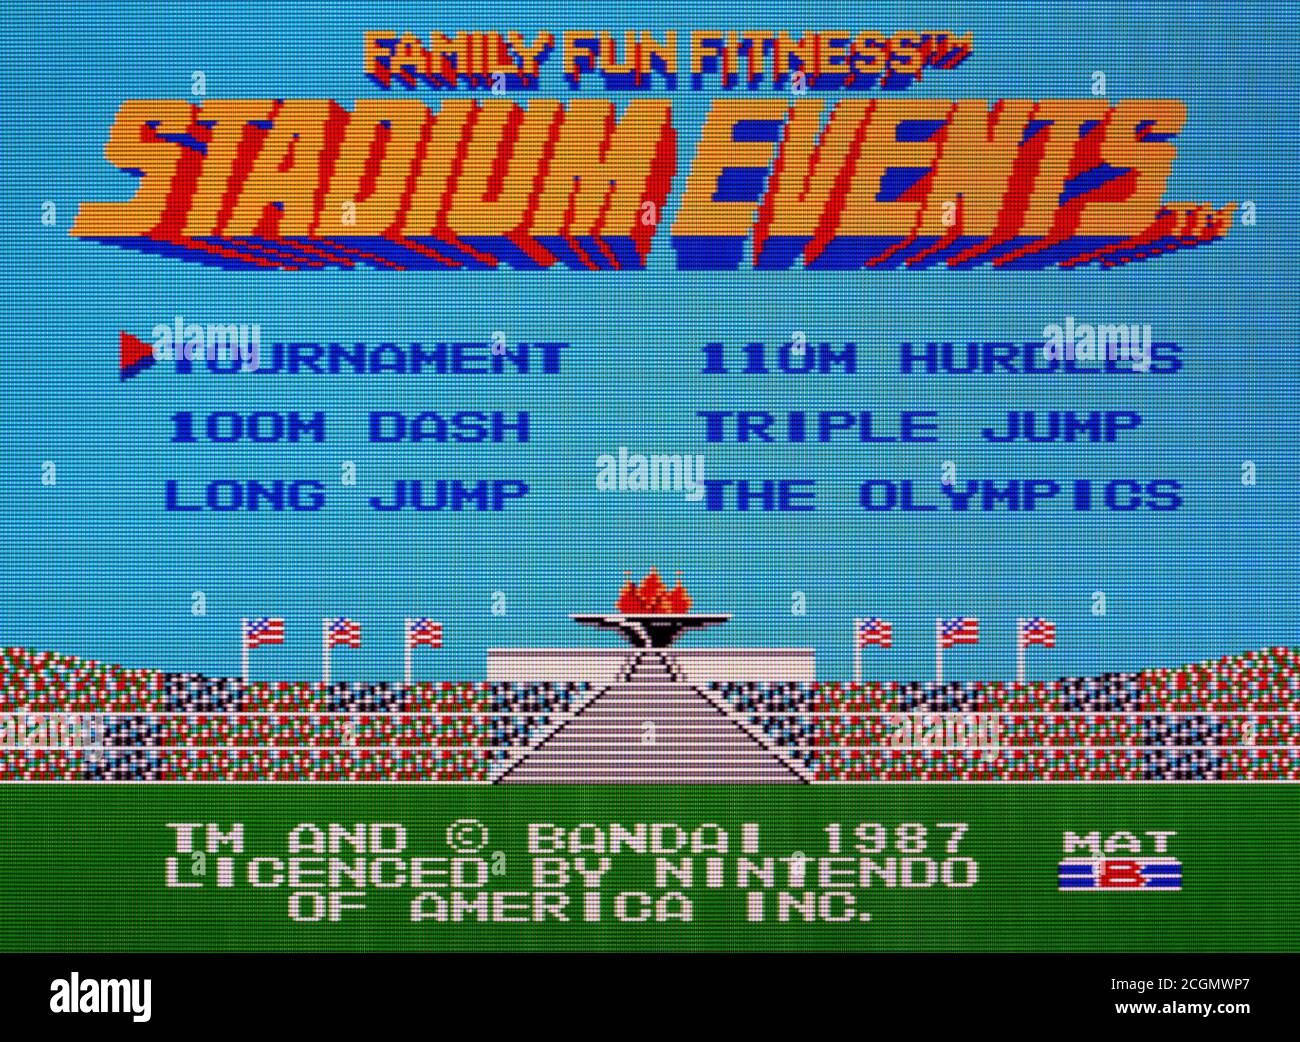 Stadium Events - Nintendo Entertainment System - NES Videogame - Editorial use only Stock Photo